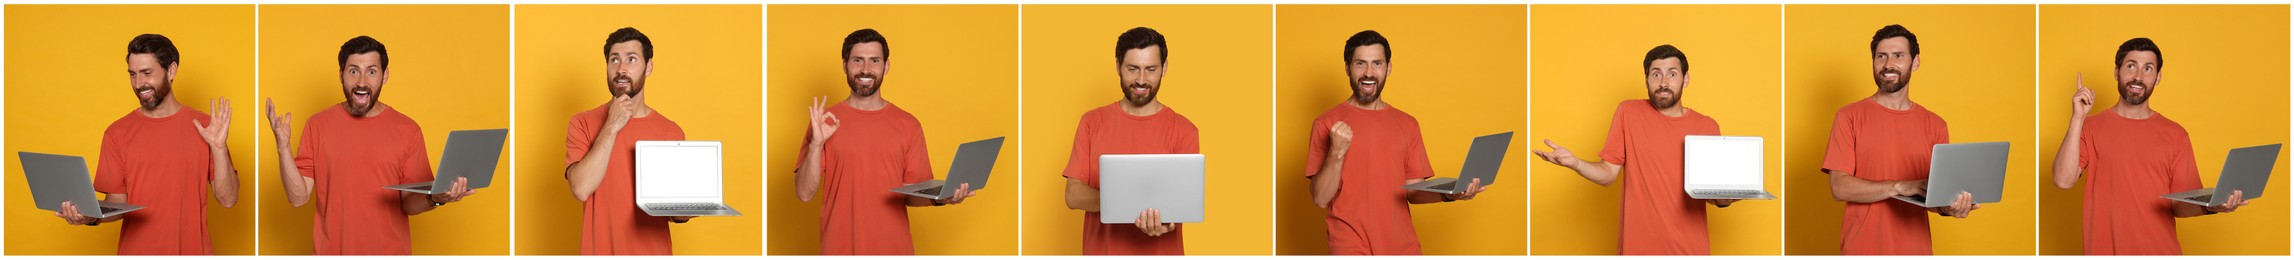 Collage with photos of man holding modern laptops on yellow background. Banner design